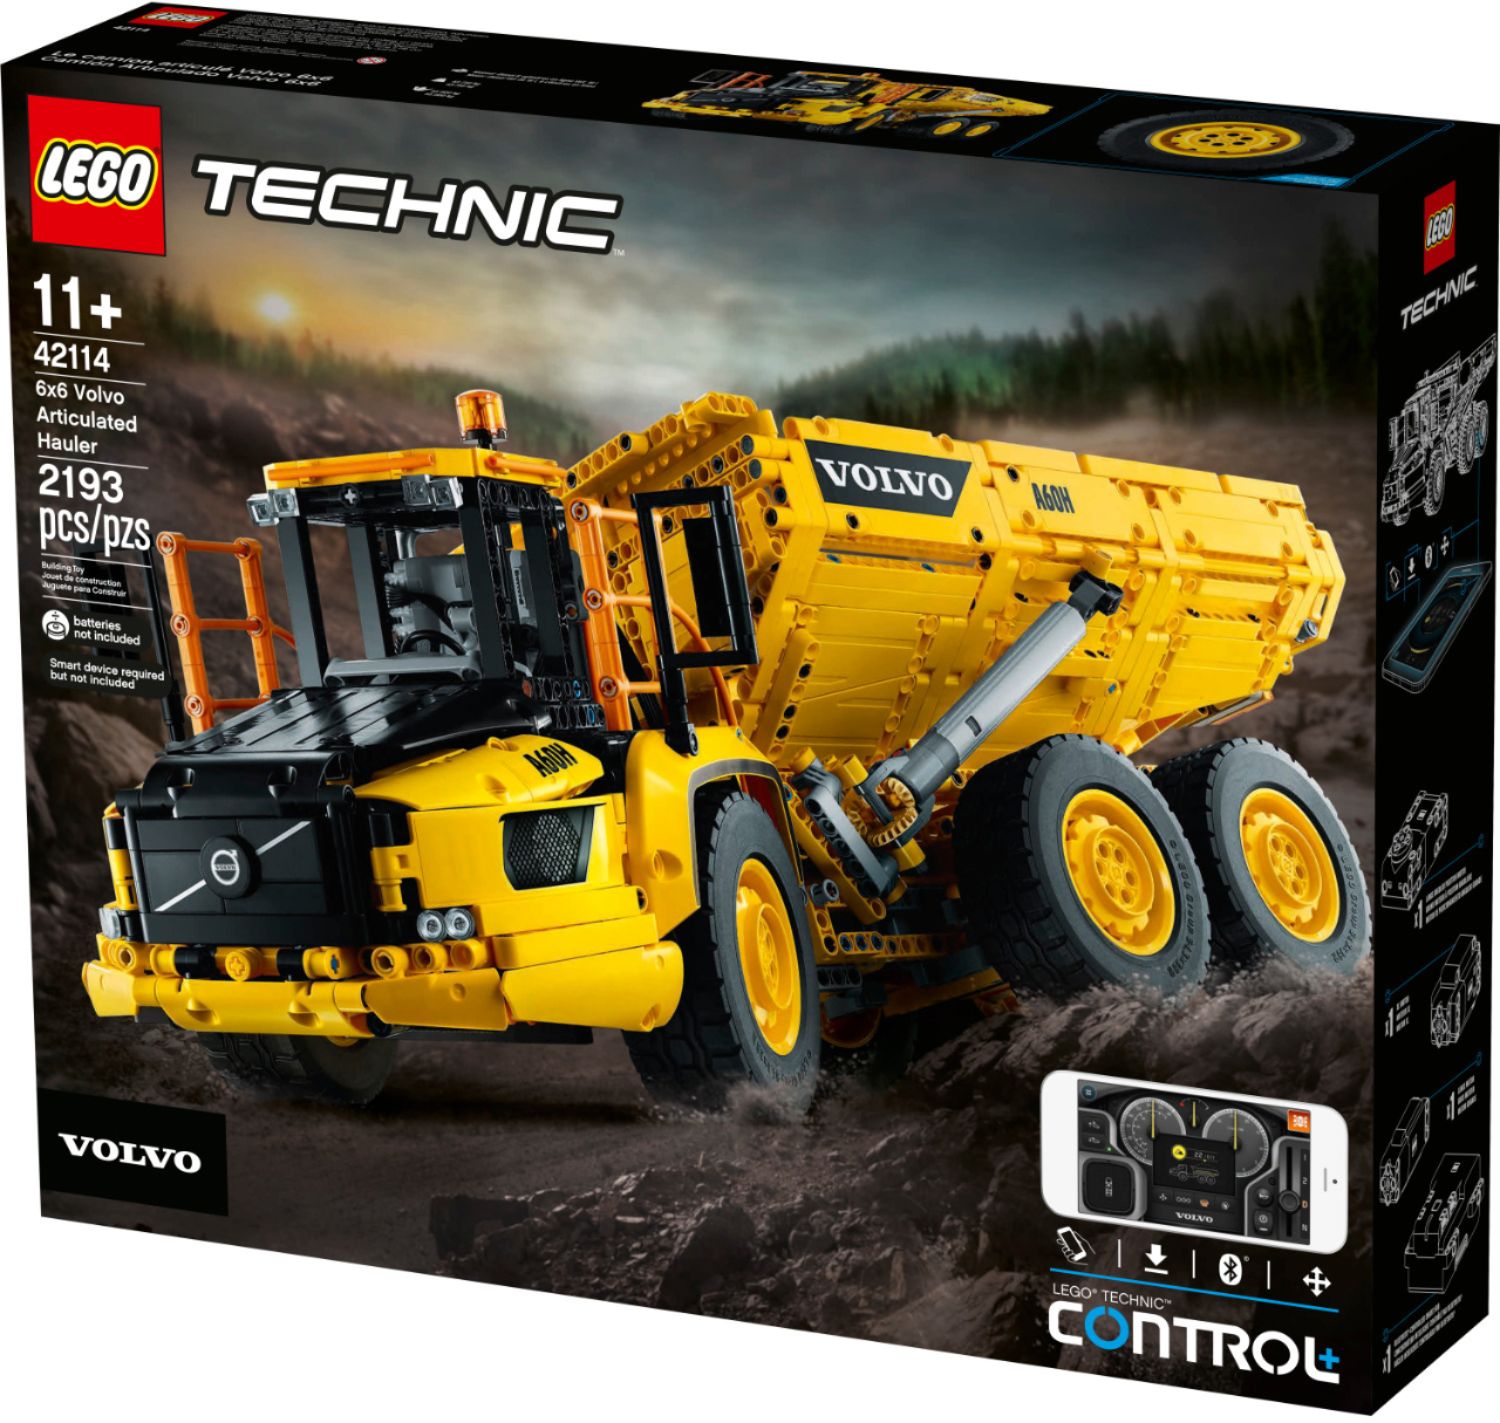 Angle View: LEGO - Technic 6x6 Volvo Articulated Hauler 42114